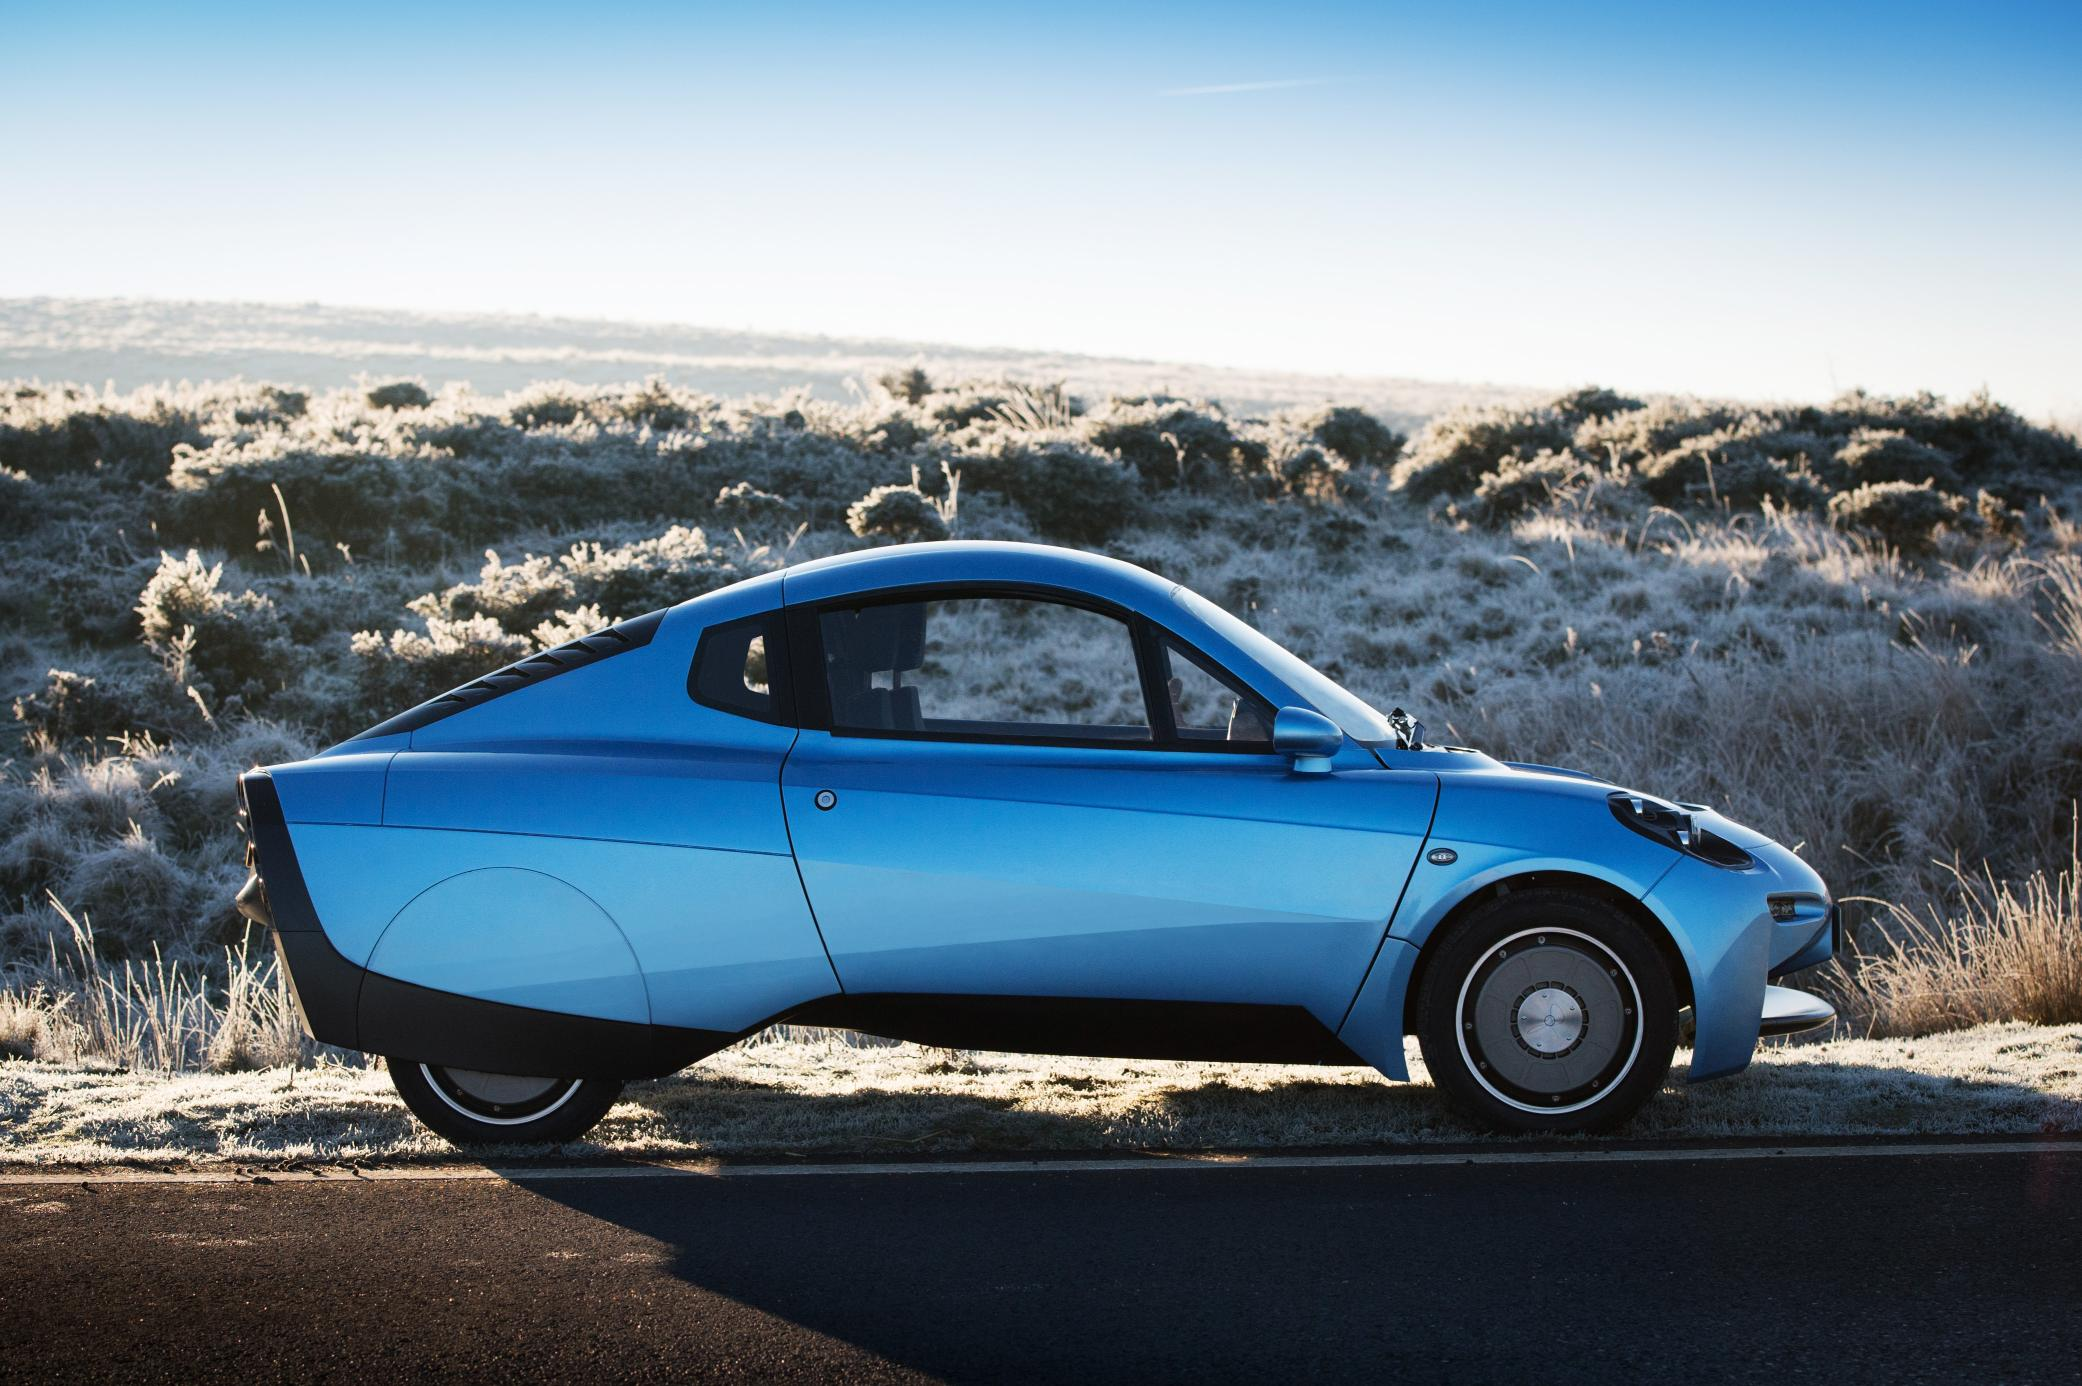 A door for a hydrogen powered car has been build using flax supplied by a materials specialist.